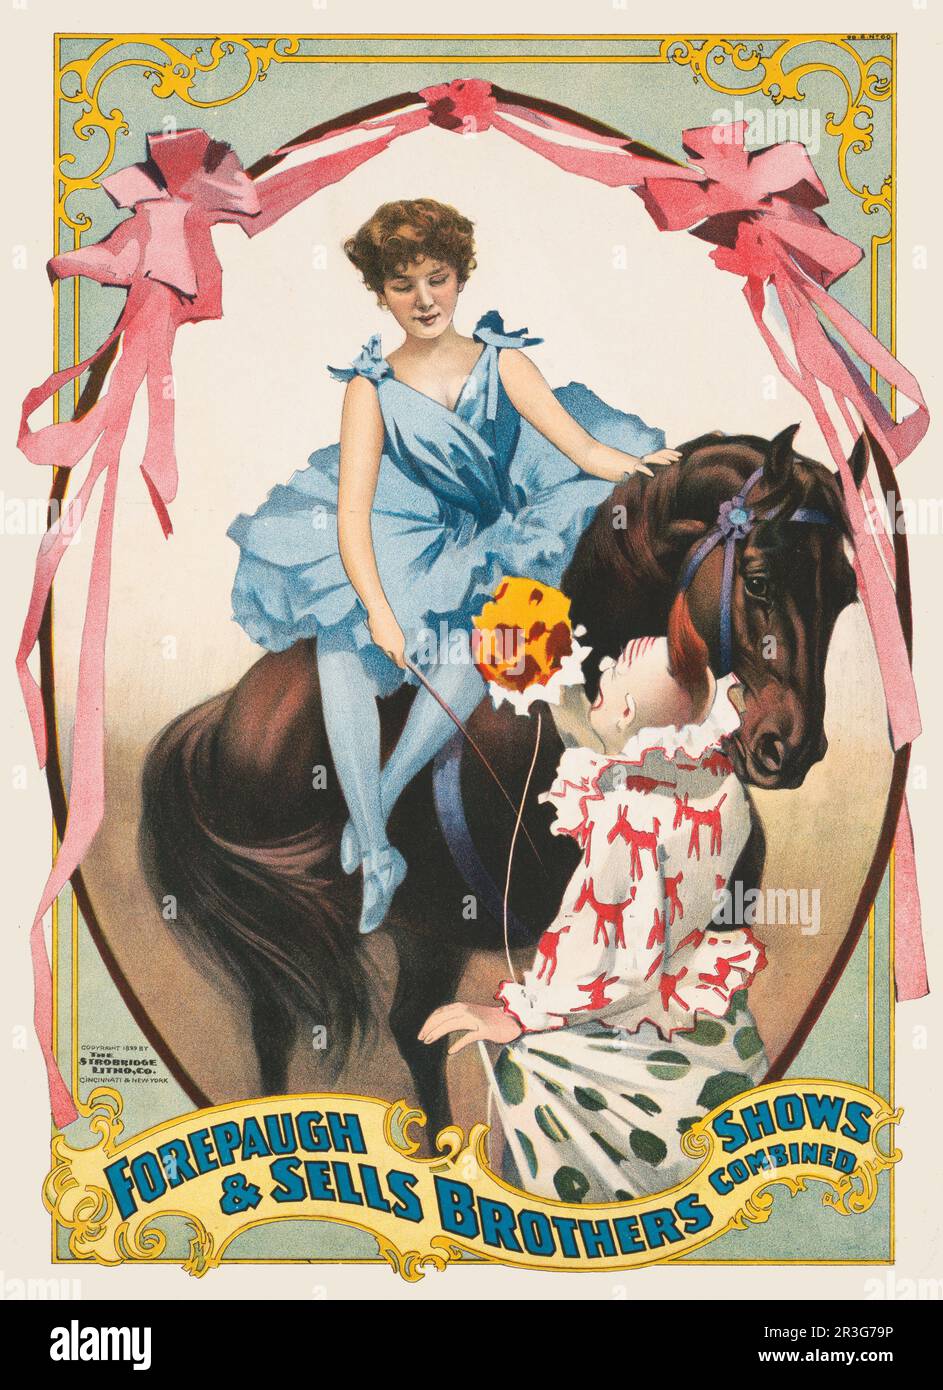 Vintage Forepaugh & Sells Brothers circus poster showing clown handing flowers to a woman on horseback, circa 1899. Stock Photo